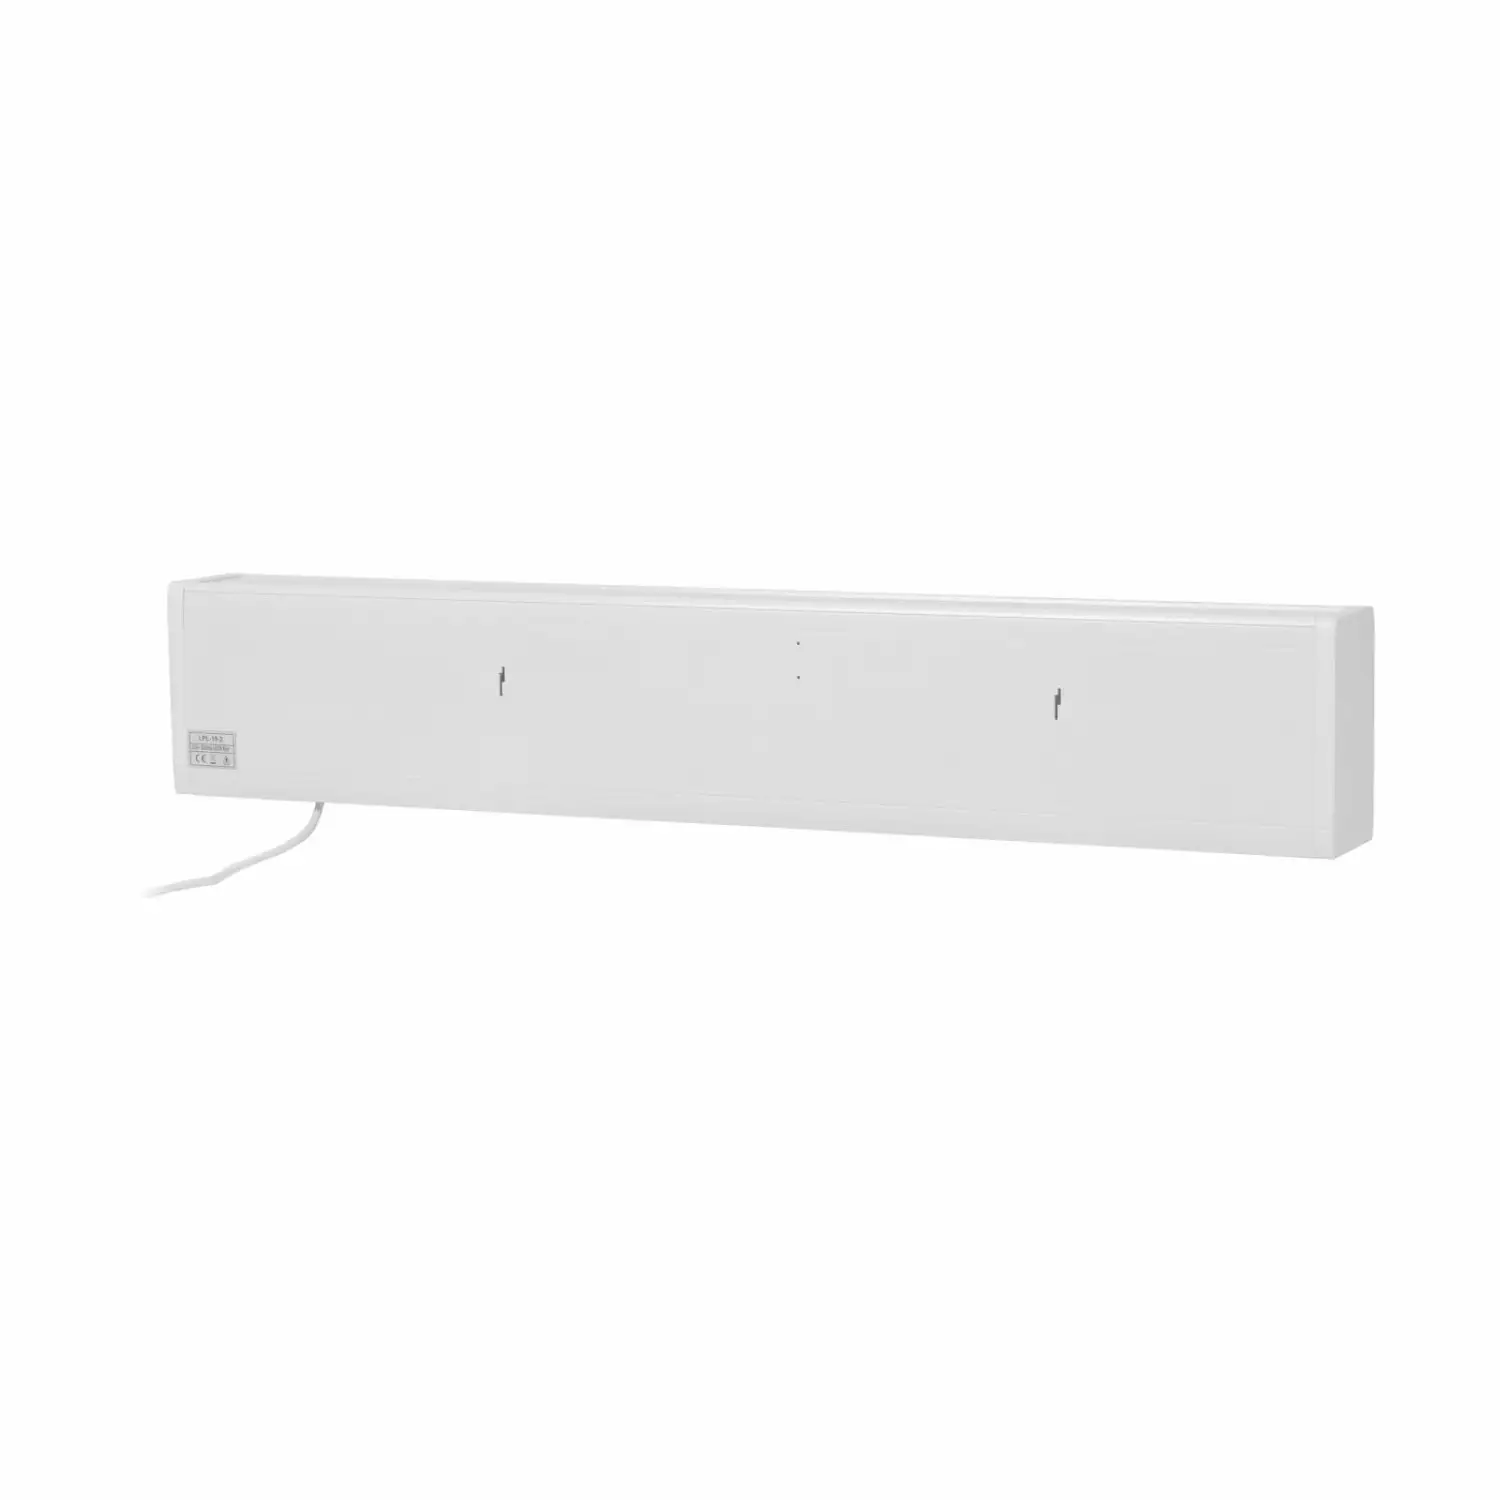 Eurom Alutherm Baseboard 1500 Wi-Fi White Convectorkachel - 1500W - 60m3